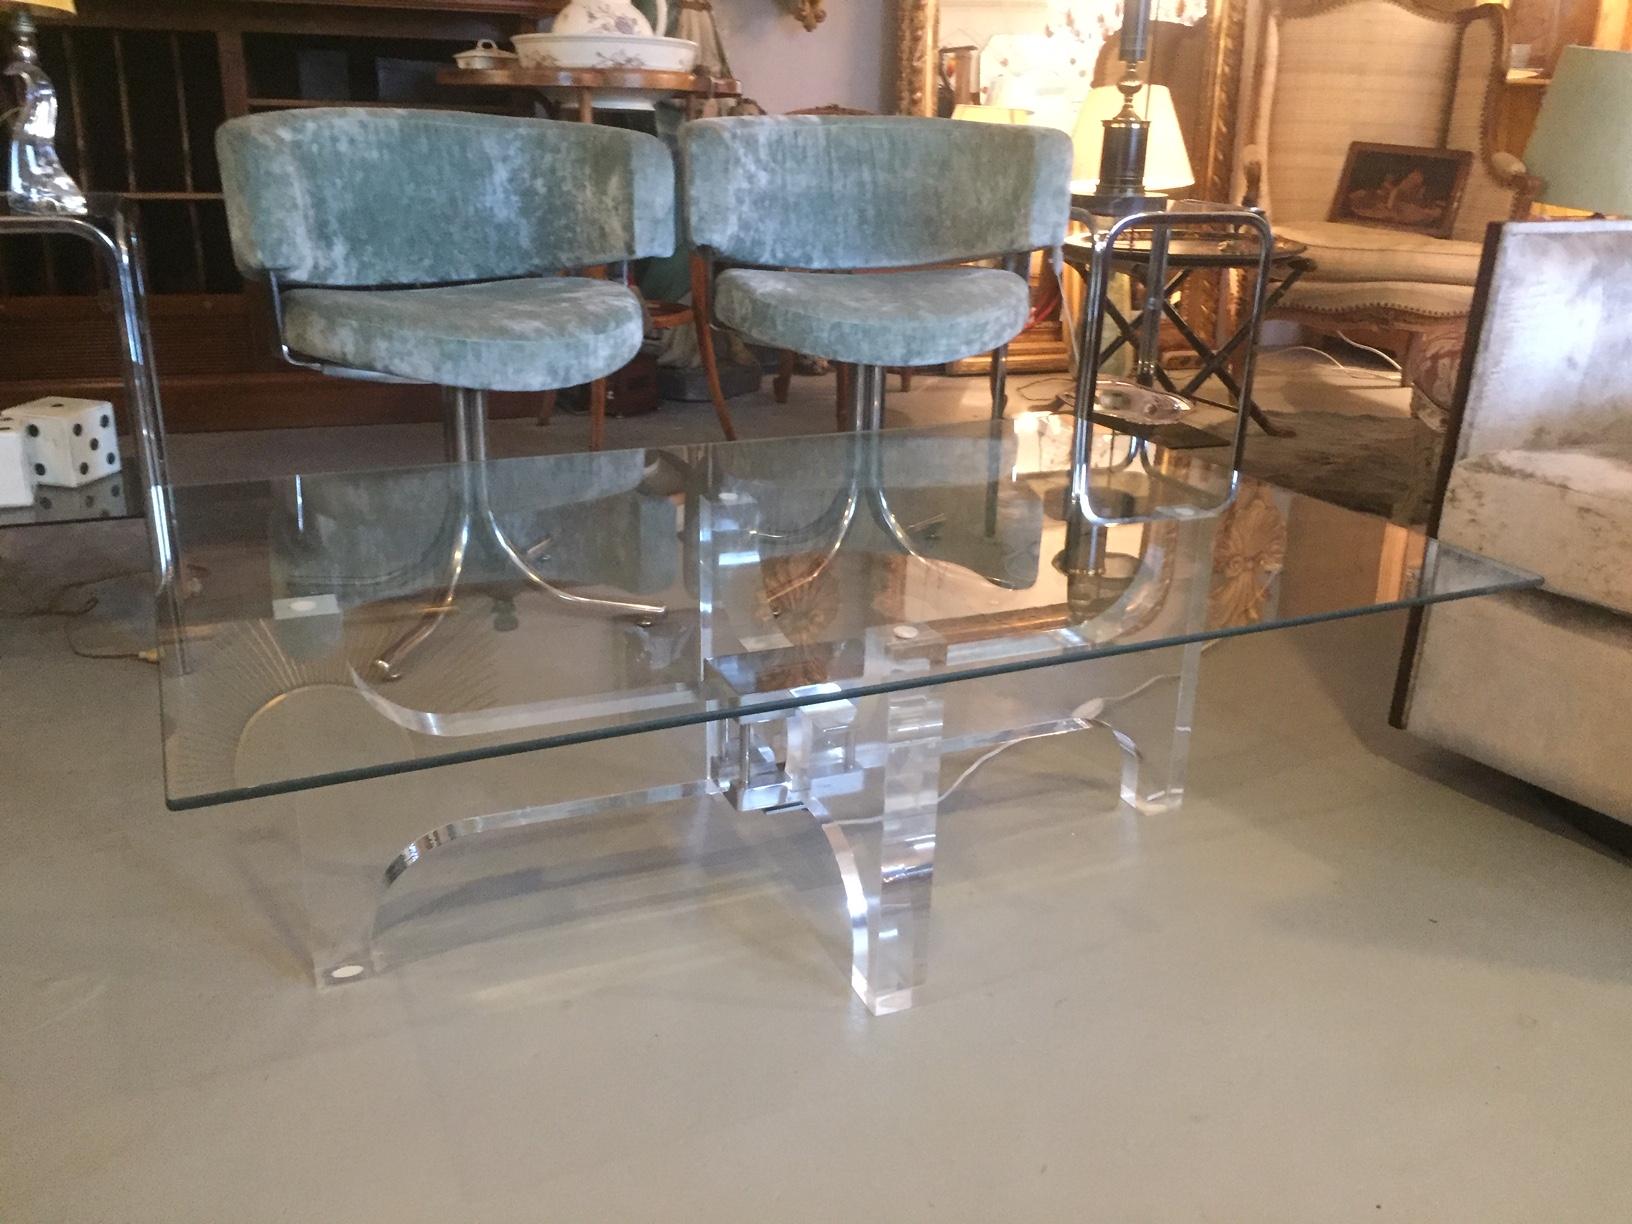 Beautiful and rare 20th century French light coffee table from the 1970s.
The tabletop is made with thick glass and the base is made with plexiglass.
The Plexiglass base can be Lighted by a bulb at the center of the table. The top is